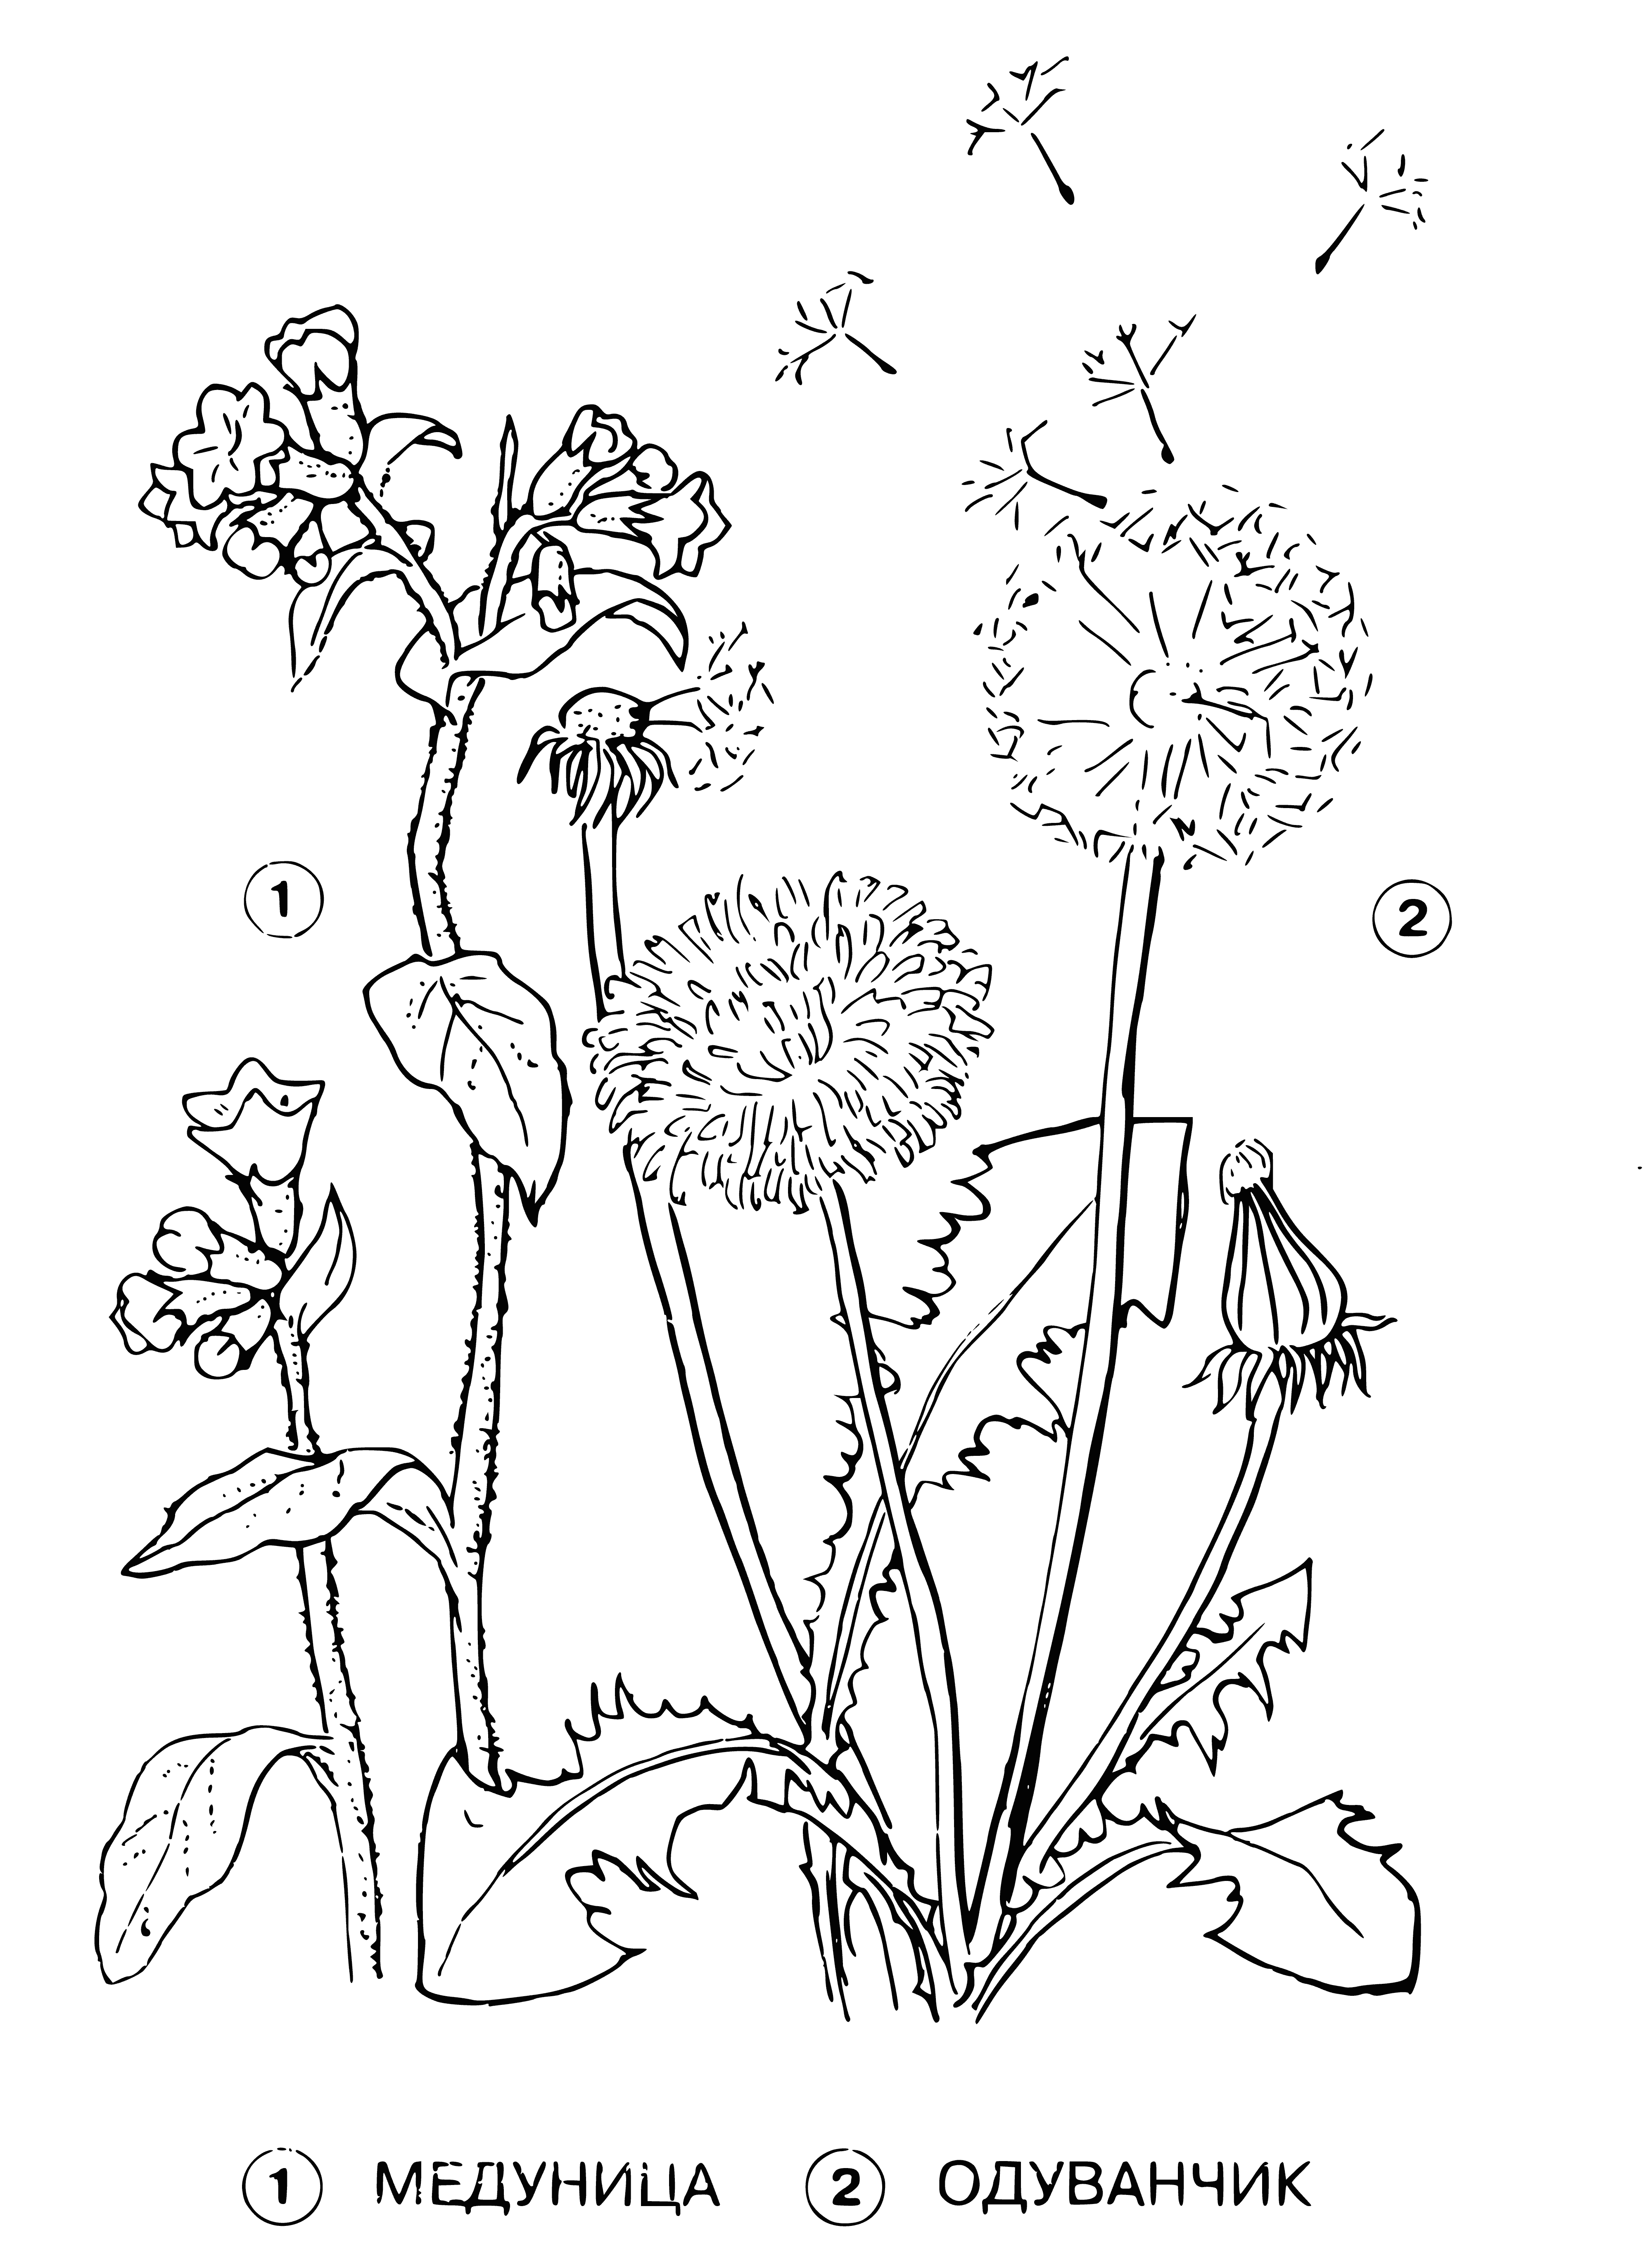 Lumpy and dandelion coloring page